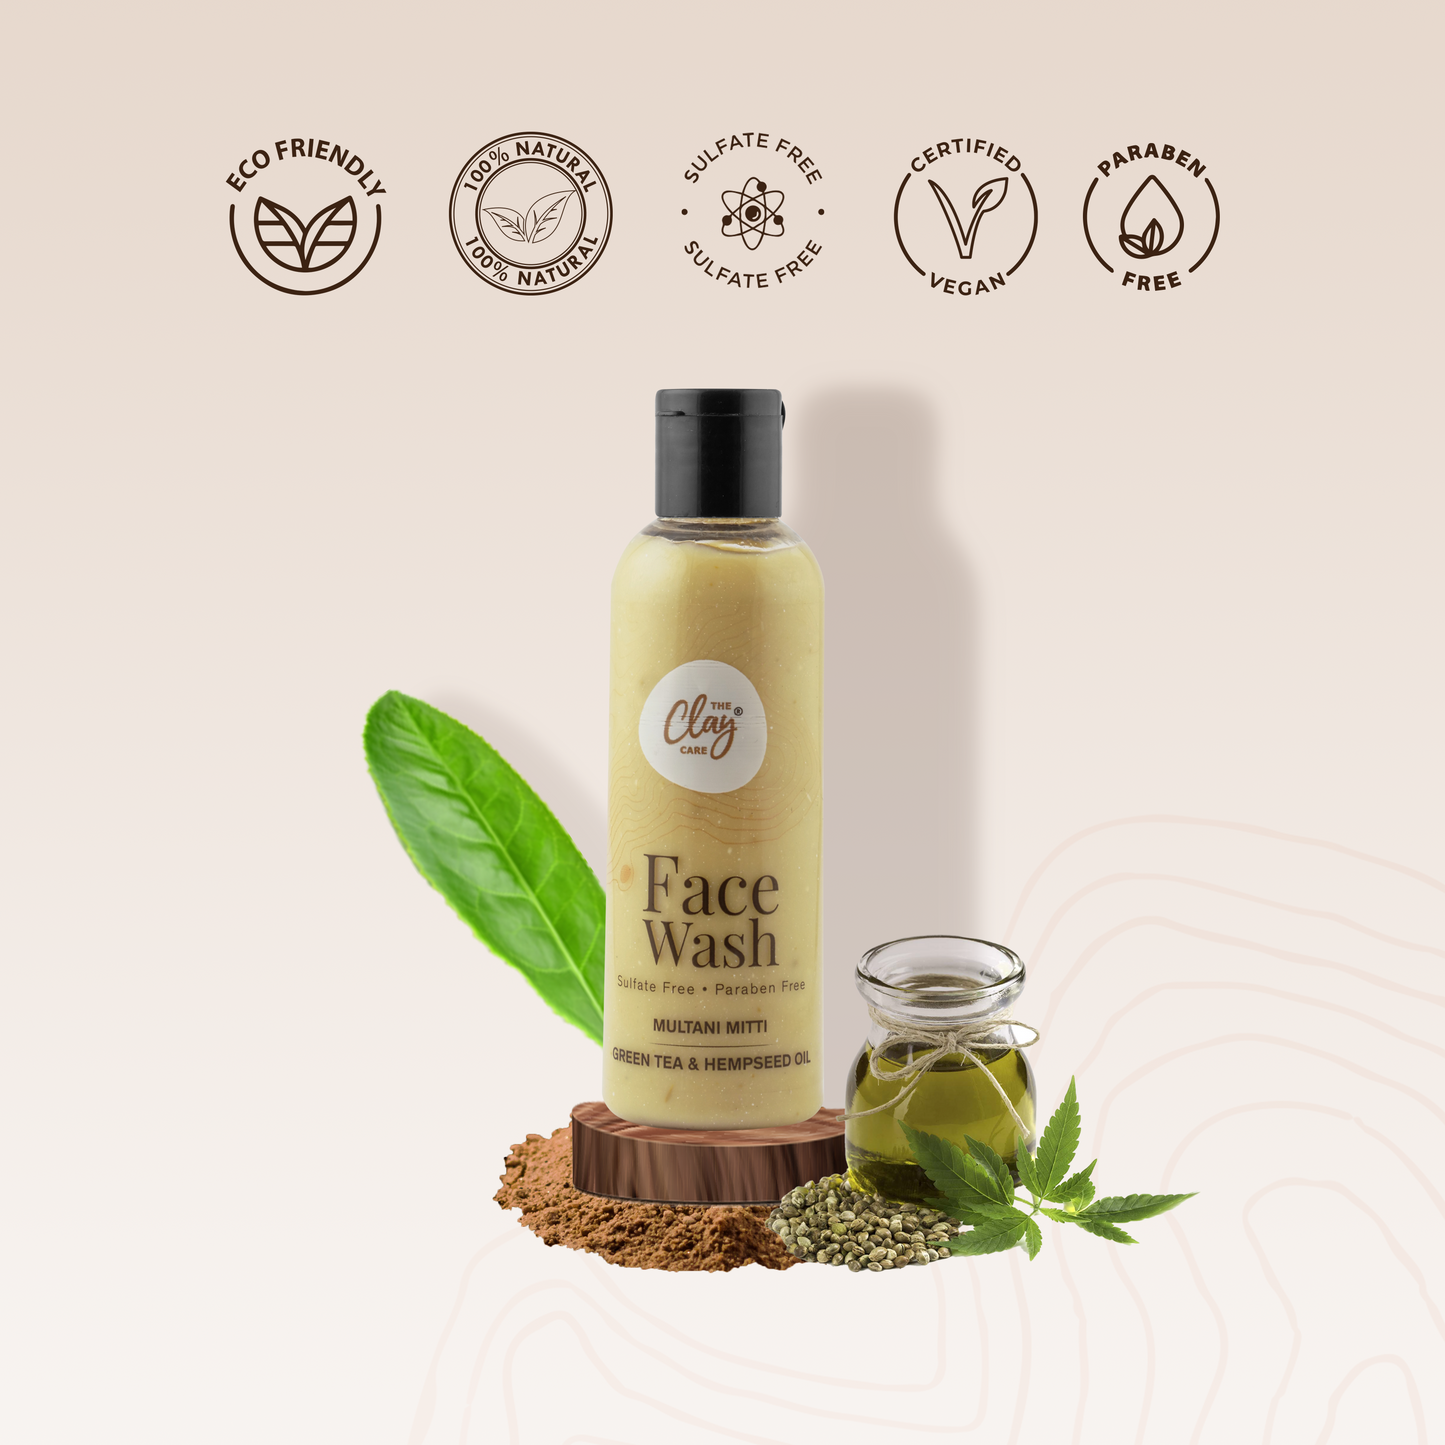 Clay Care Face Wash Natural Multani Mitti, Green Tea and Hempseed Oil for Men and Women Suitable for Oily Skin, Helps for Uneven and Acne Skin | Suitable for All Skin Type – 100ml